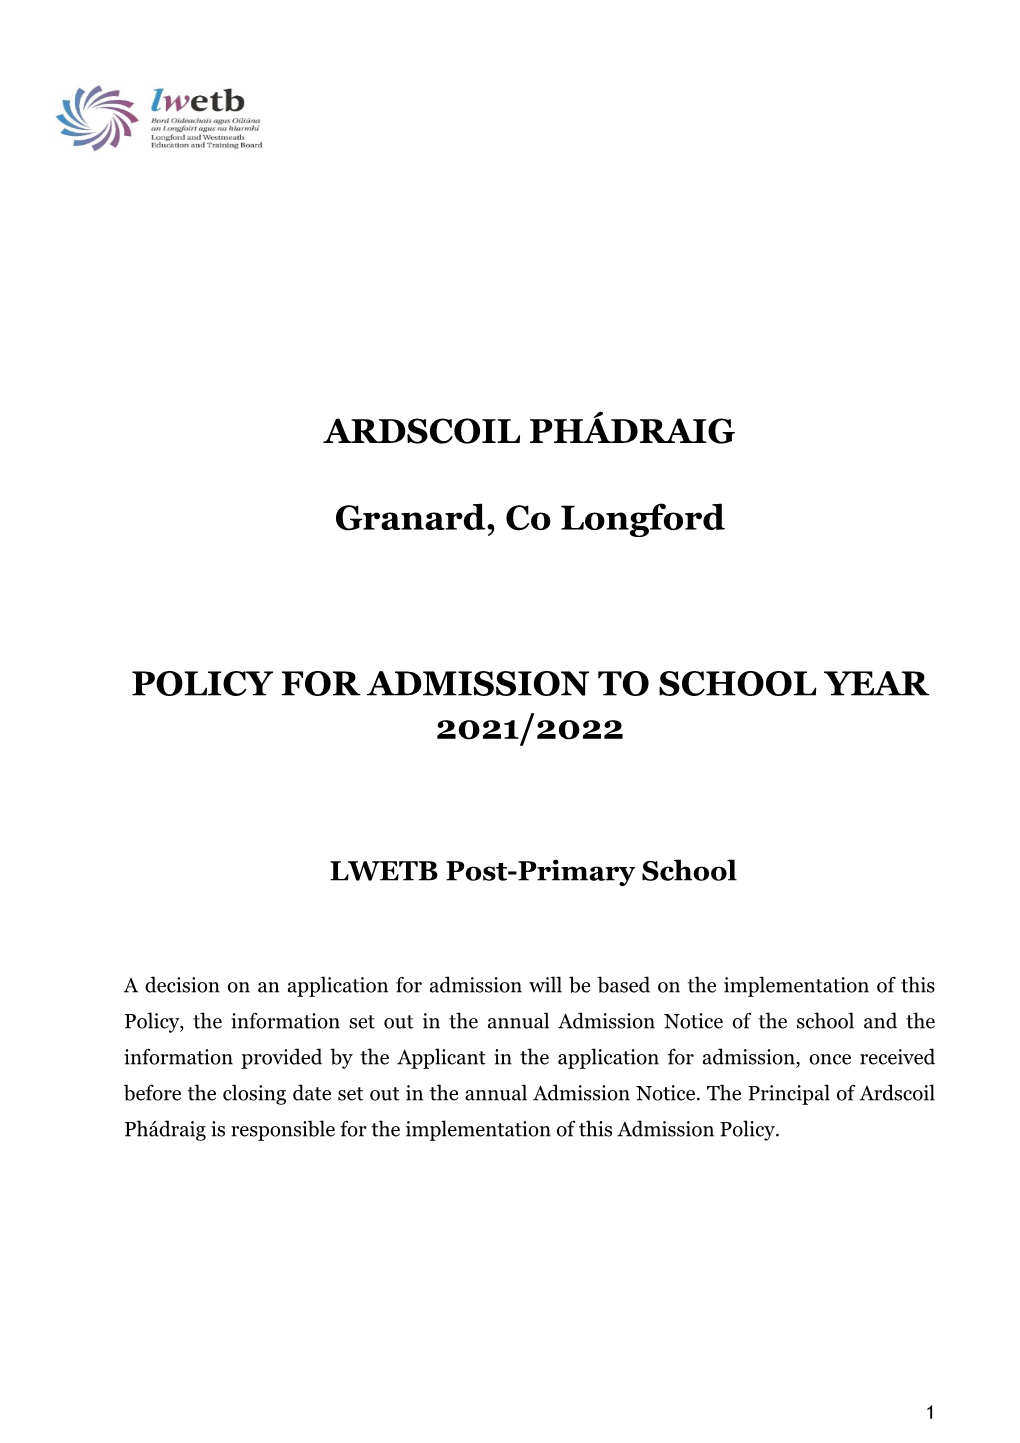 Admissions Policy